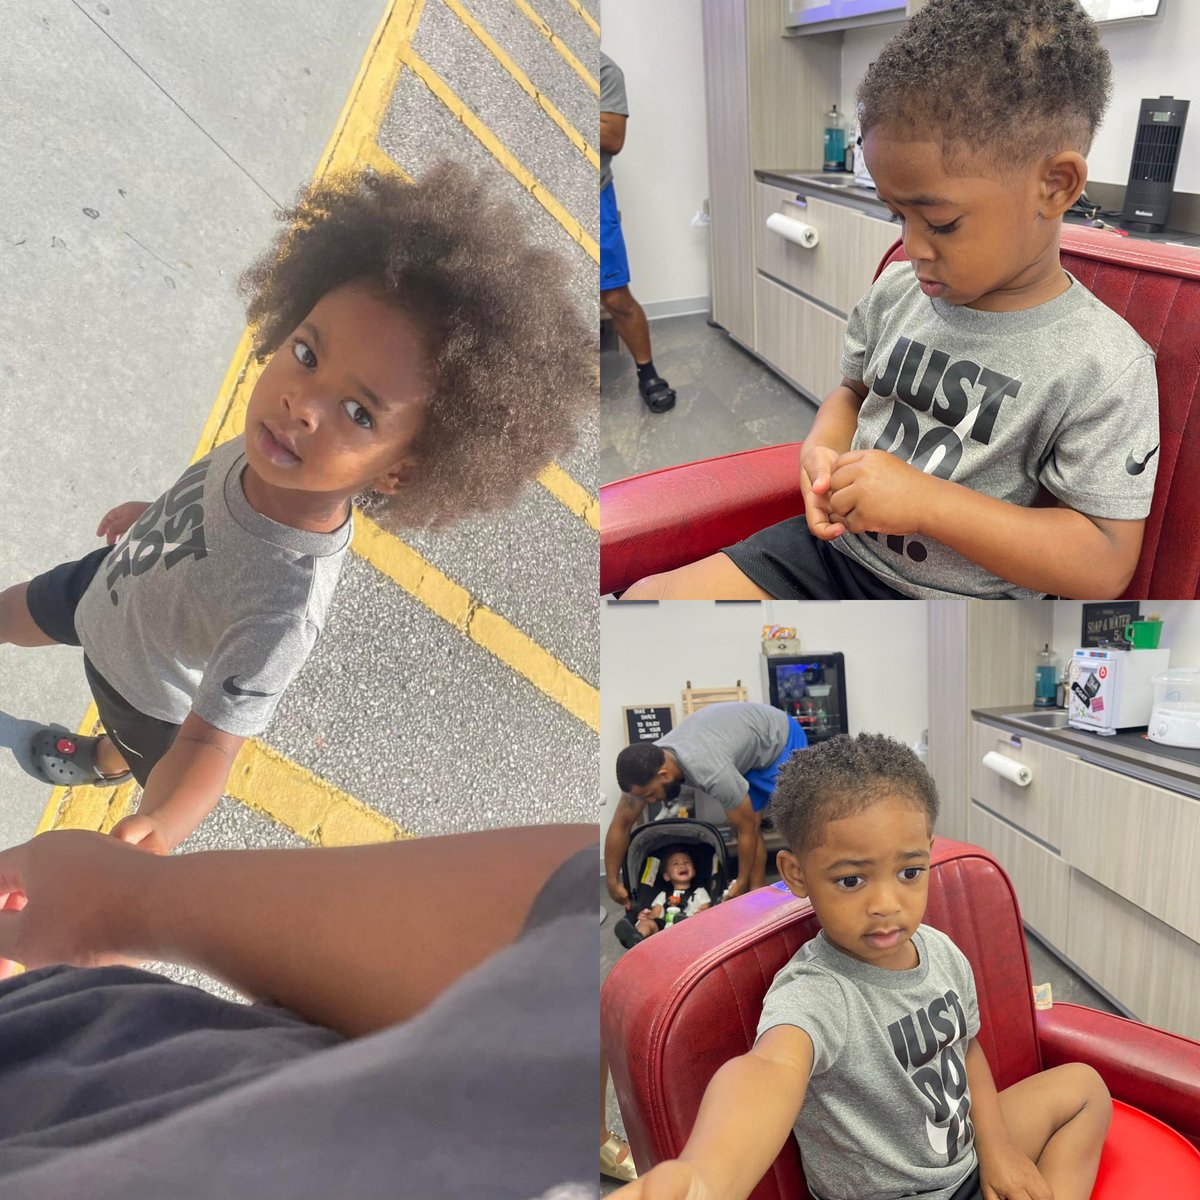 He walked in like y’all really about to cut my hair off

The last pic is when we became friends at the end he wanted me to open his candy 😂 #Elitekids #firstcut